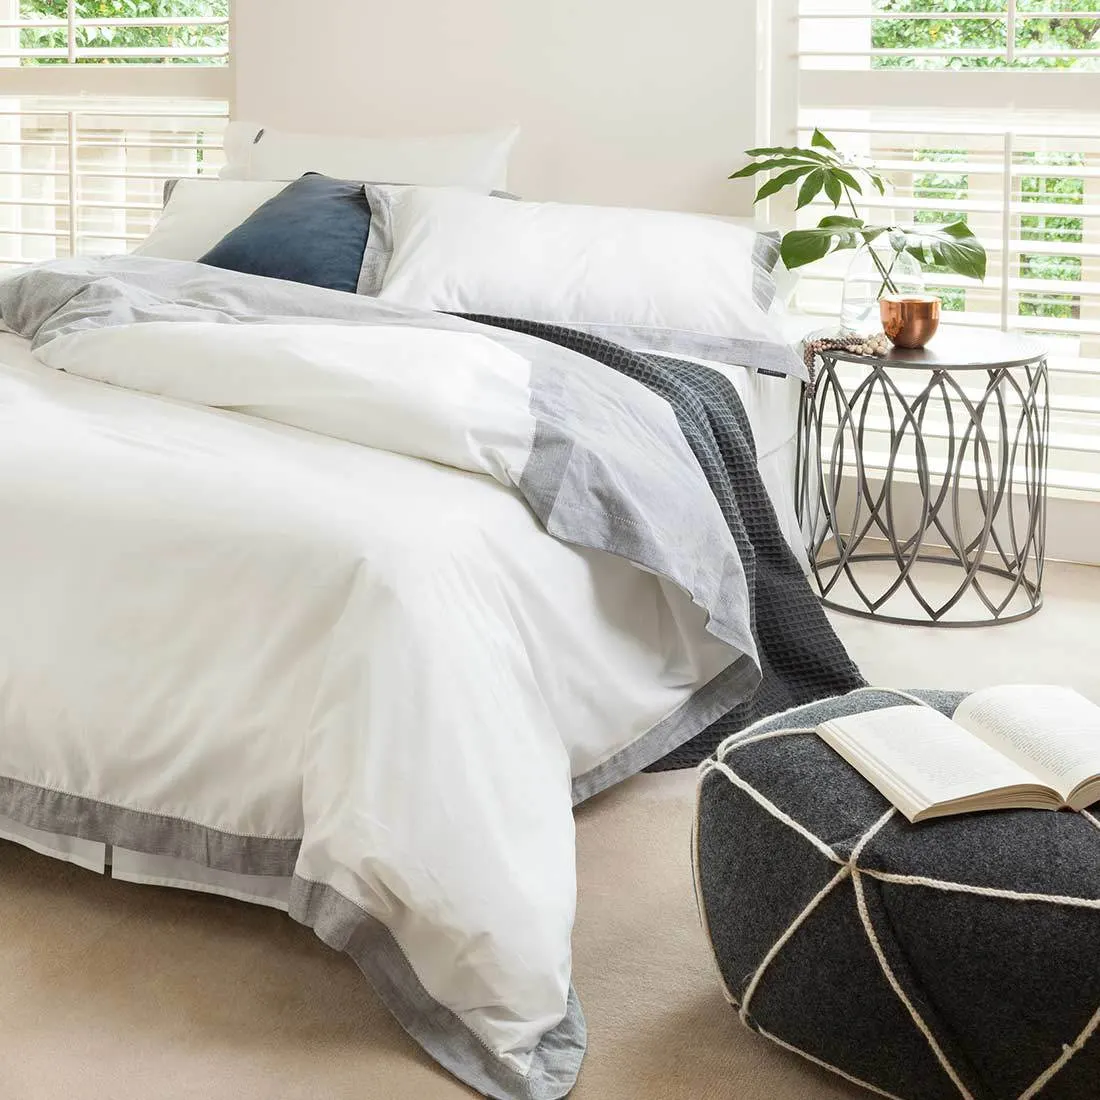 Where To Buy Bedding And Bed Linen Online Finder